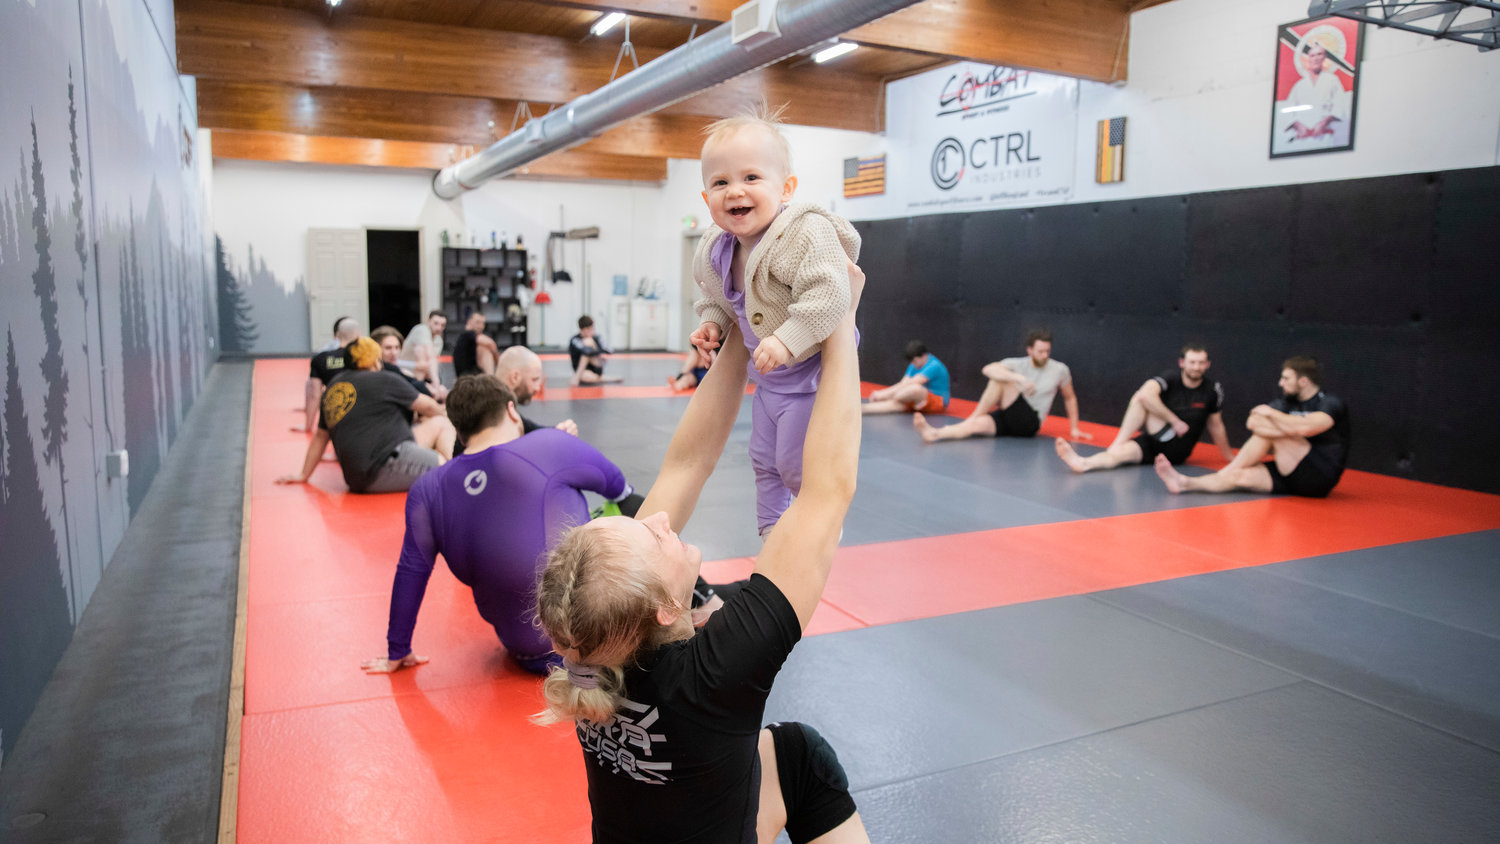 Kayla Weed, a W.F. West graduate, smiles holds up her 1-year-old daughter Mia inside Combat Sport and Fitness in Enumclaw on Thursday while training for her upcoming fight on March 11, at the Muckleshoot Casino.